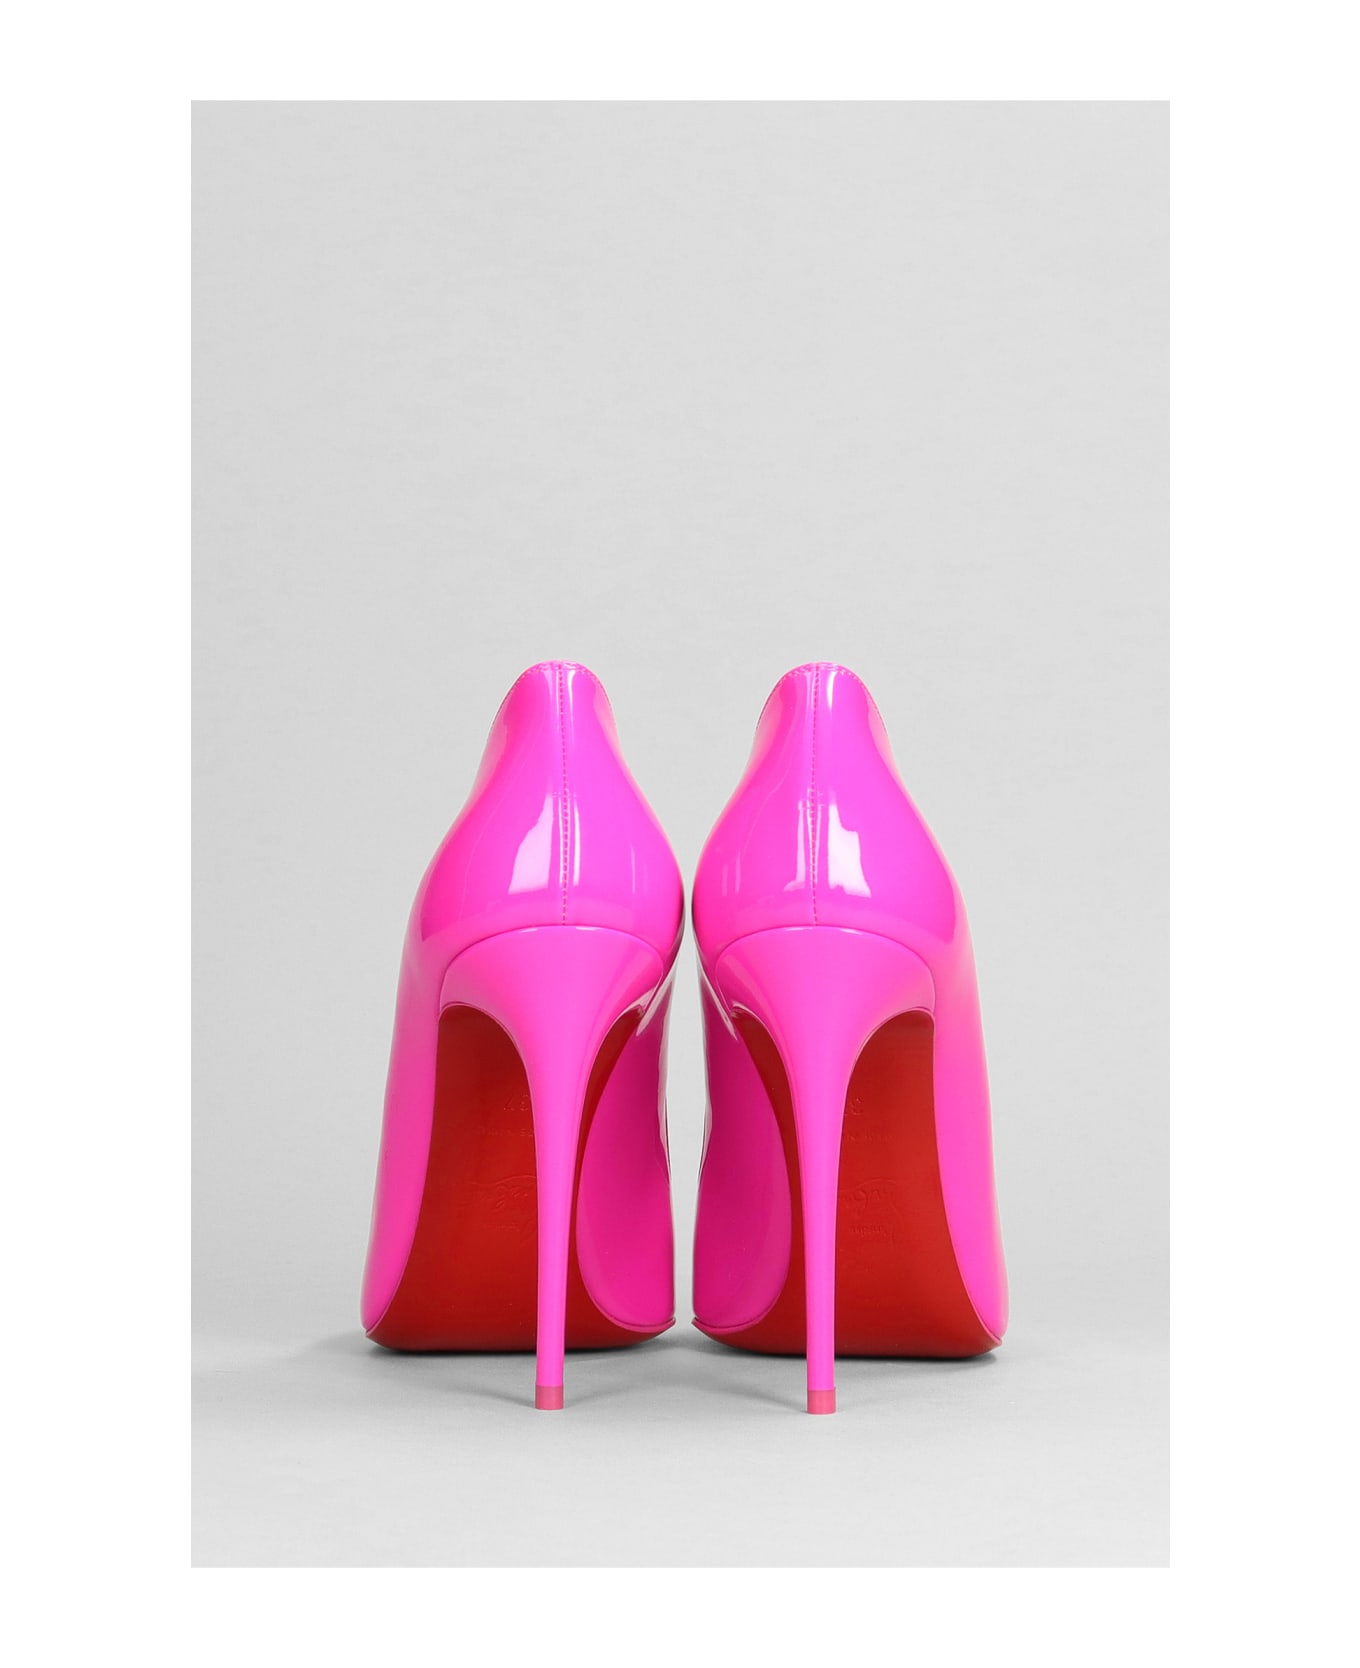 Christian Louboutin Hot Chick Sling 100 Pumps In Fuxia Patent Leather - fuxia